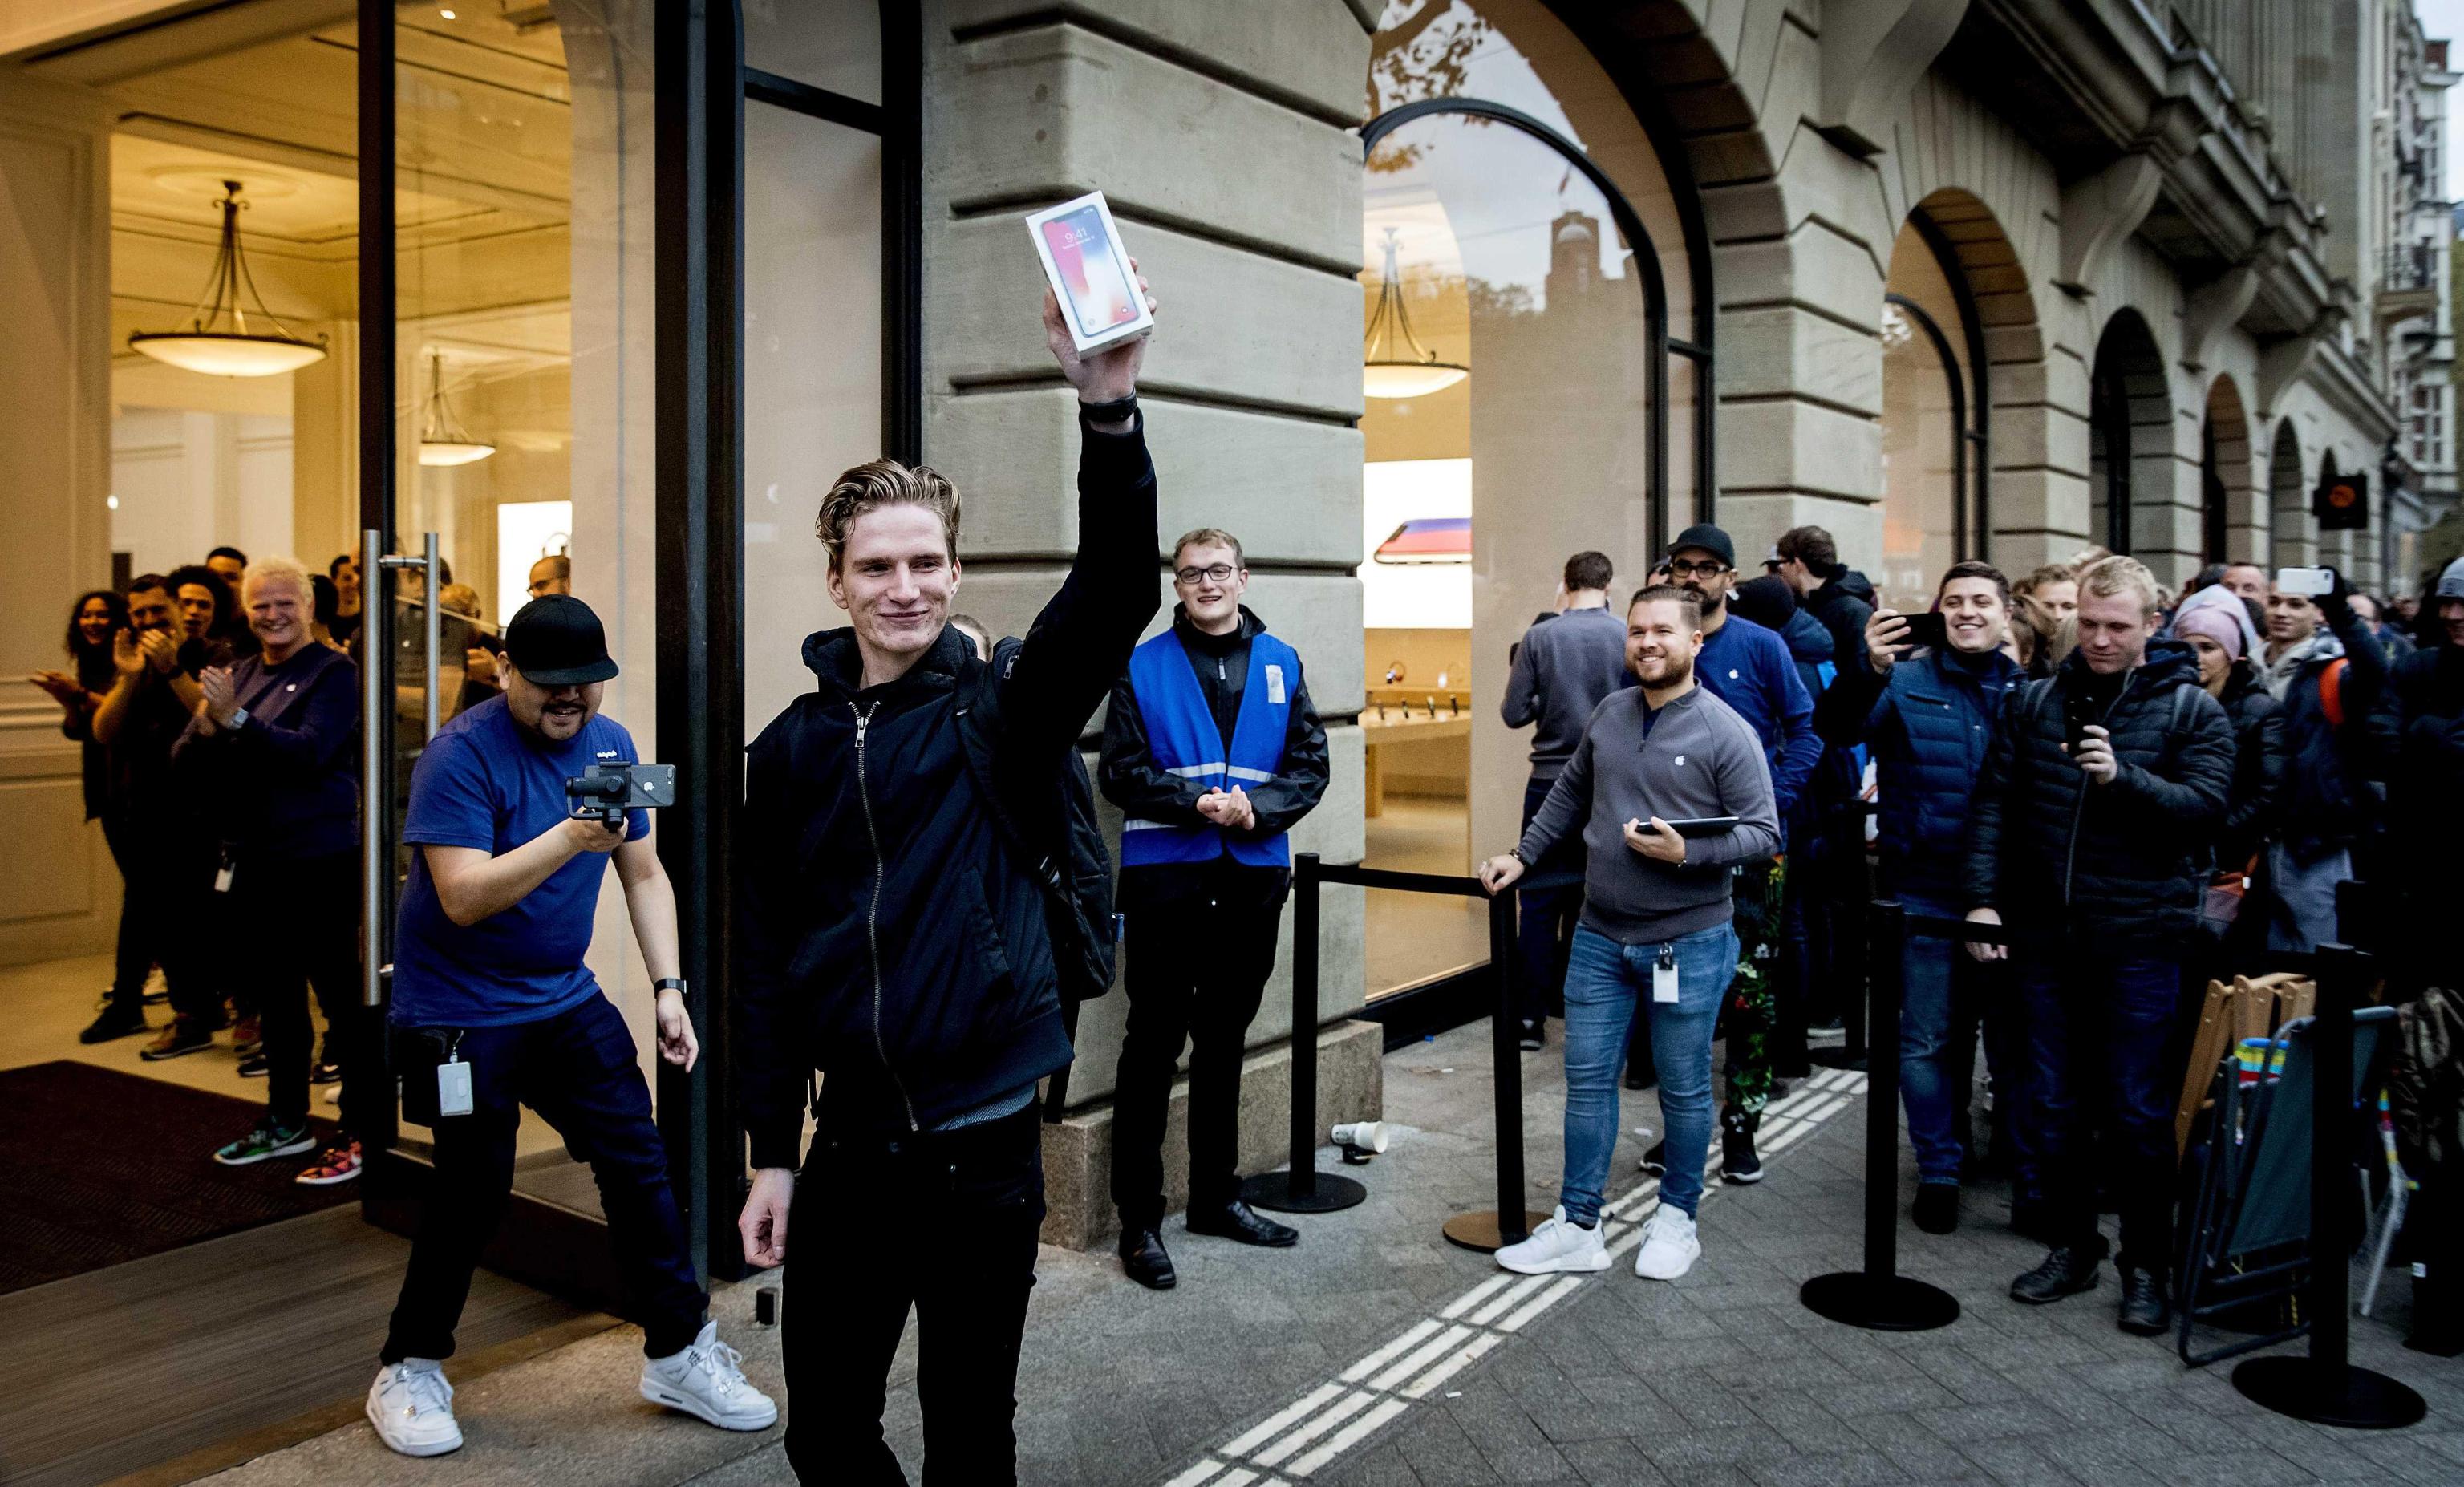 epa06305424 A customer with the new iPhone X outside an Apple store during the launch of the new iPhone X in Amsterdam, The Netherlands, 03 November 2017. Apple's new iPhone X goes  on sale in more than 55 countries and territories on 03 November.  EPA/KOEN VAN WEEL